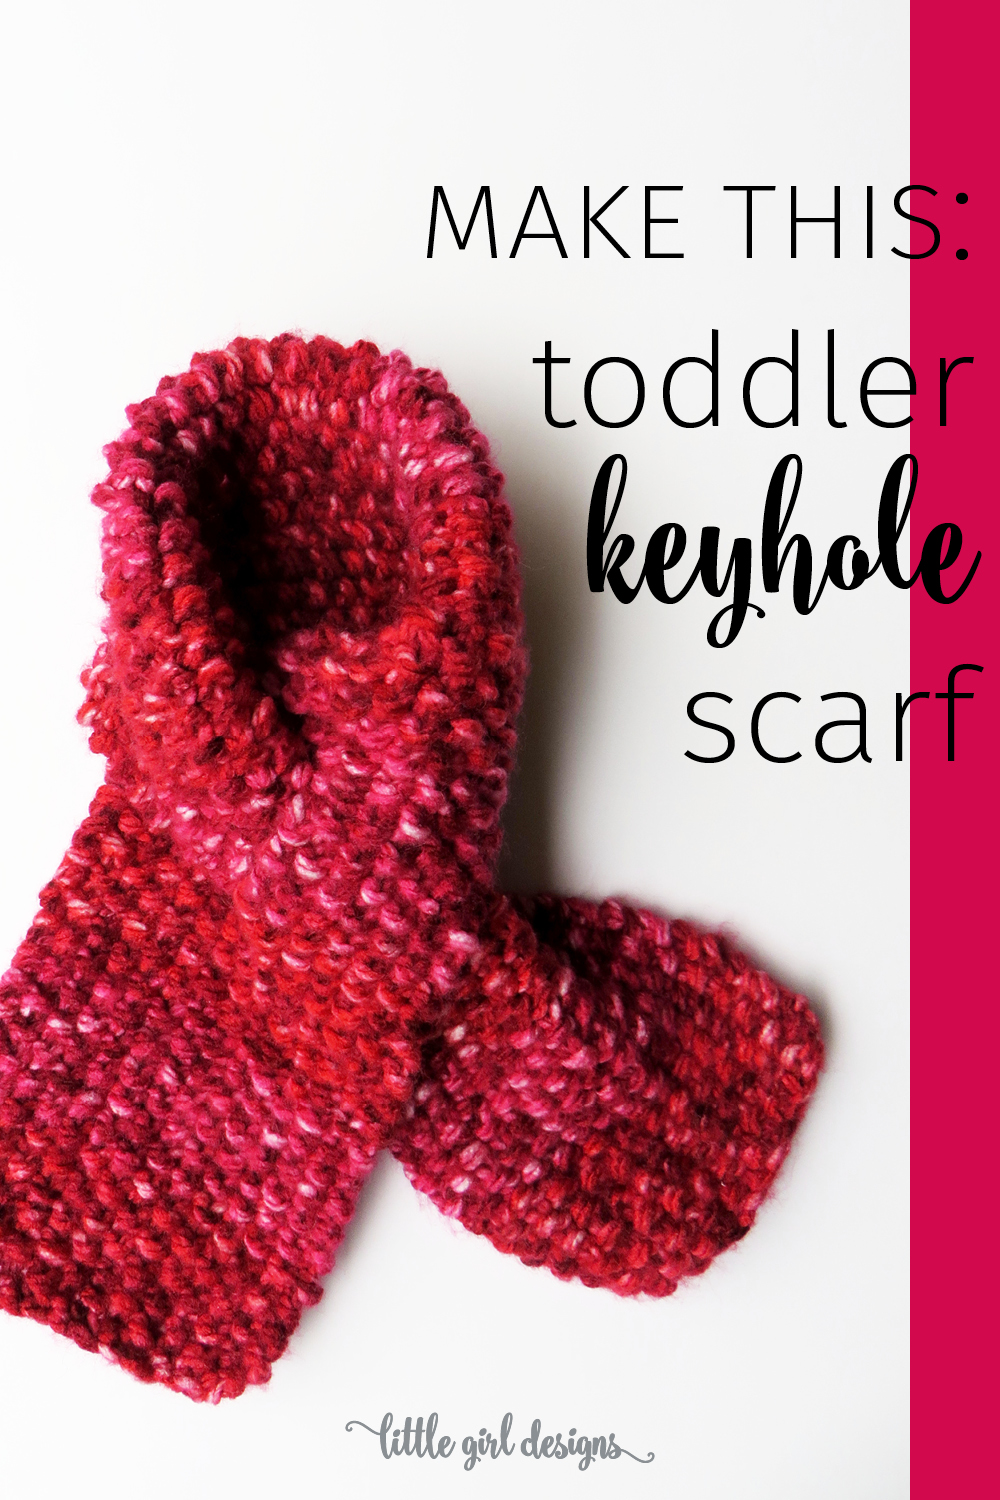 This toddler keyhole scarf knitting pattern is so easy to make. I love this scarf because it won't fall off—the keyhole keeps it nice and snug! This knit pattern can also be modified for adults.